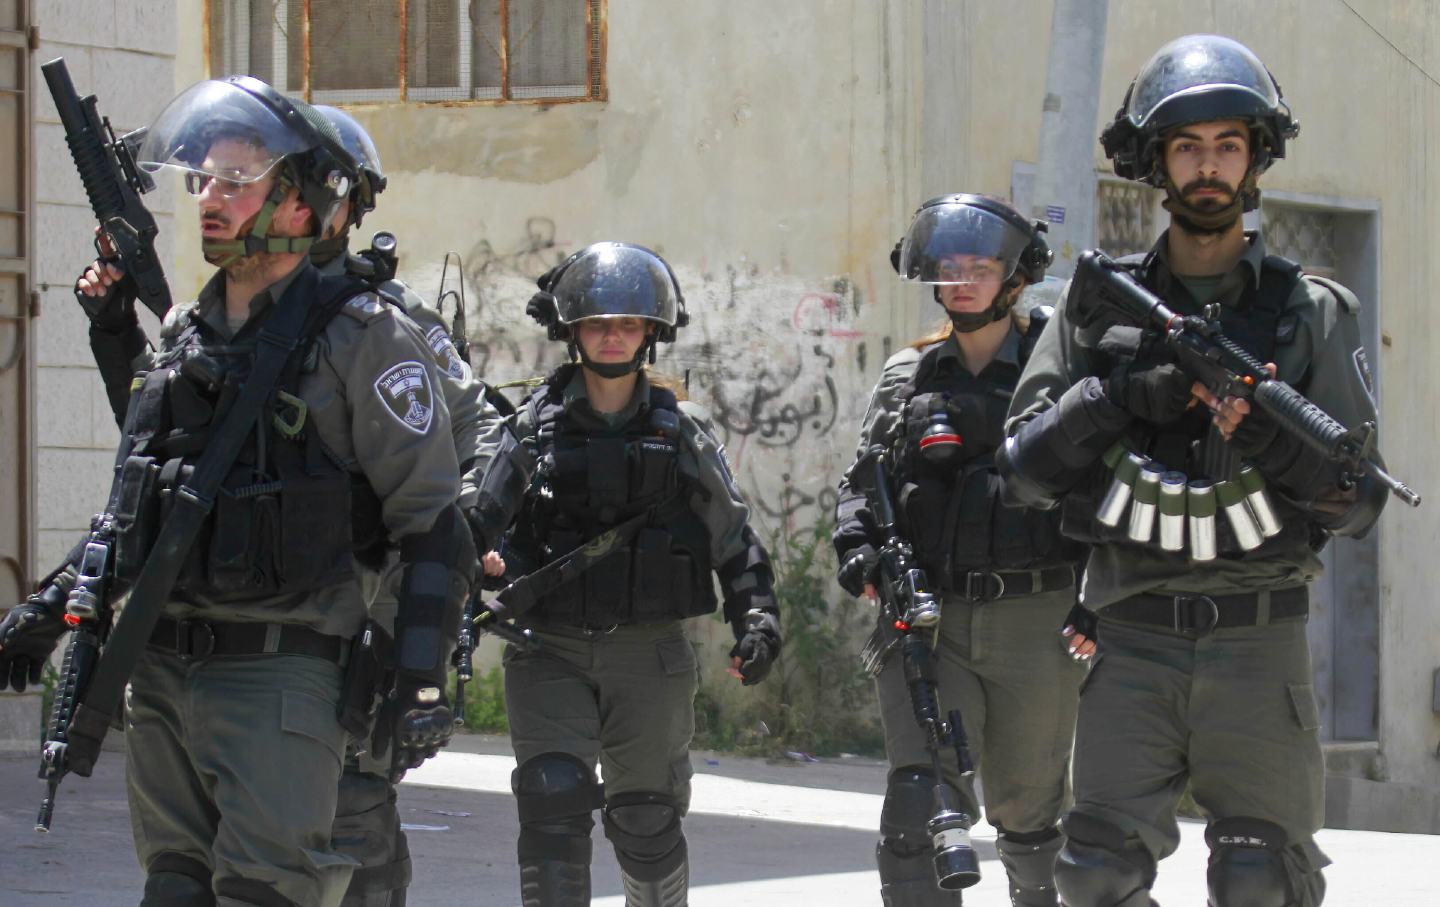 Israeli soldiers prepare to arrest Palestinians in the village of Shweika, near Tulkarm, in the northern West Bank.